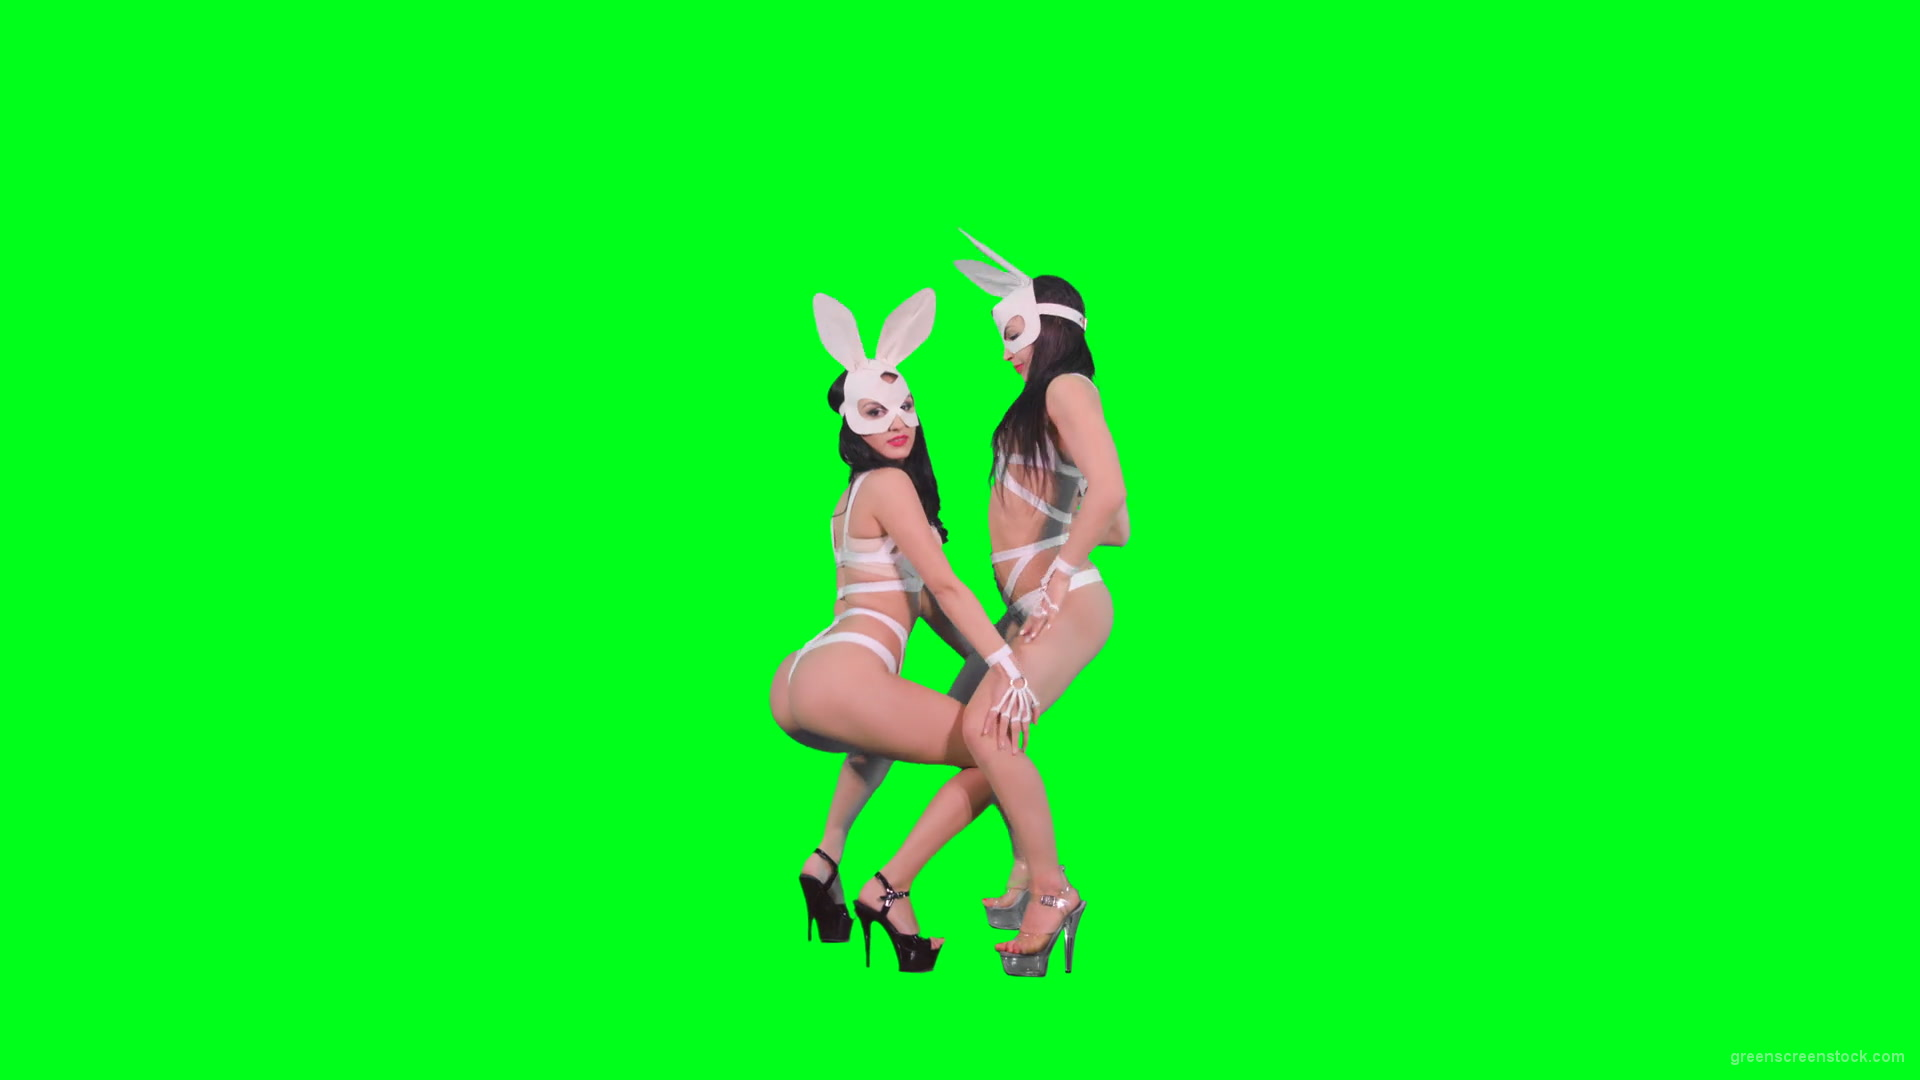 vj video background Light-erotic-girls-in-rabbit-playboy-costumes-on-green-screen-moving-sexy-4K-Video-Footage-1920_003